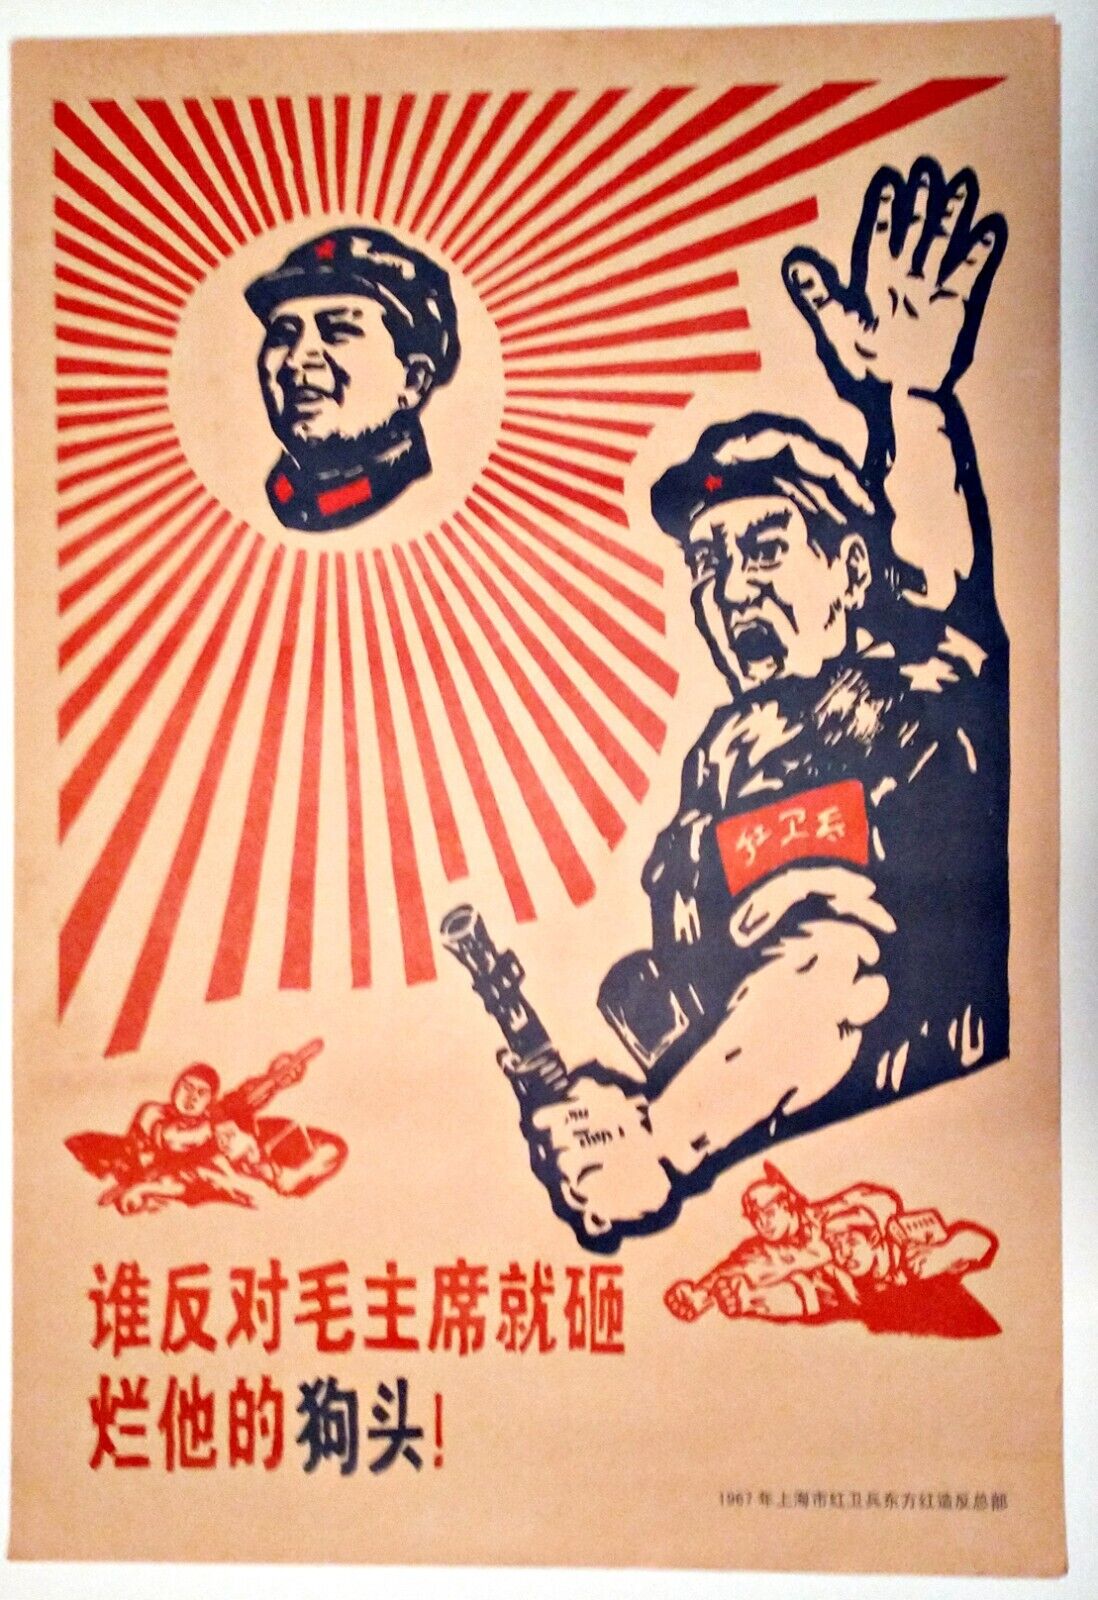 CHINESE CULTURAL REVOLUTION POSTER 60\'s VTGE - US SELLER - Heads will be smashed